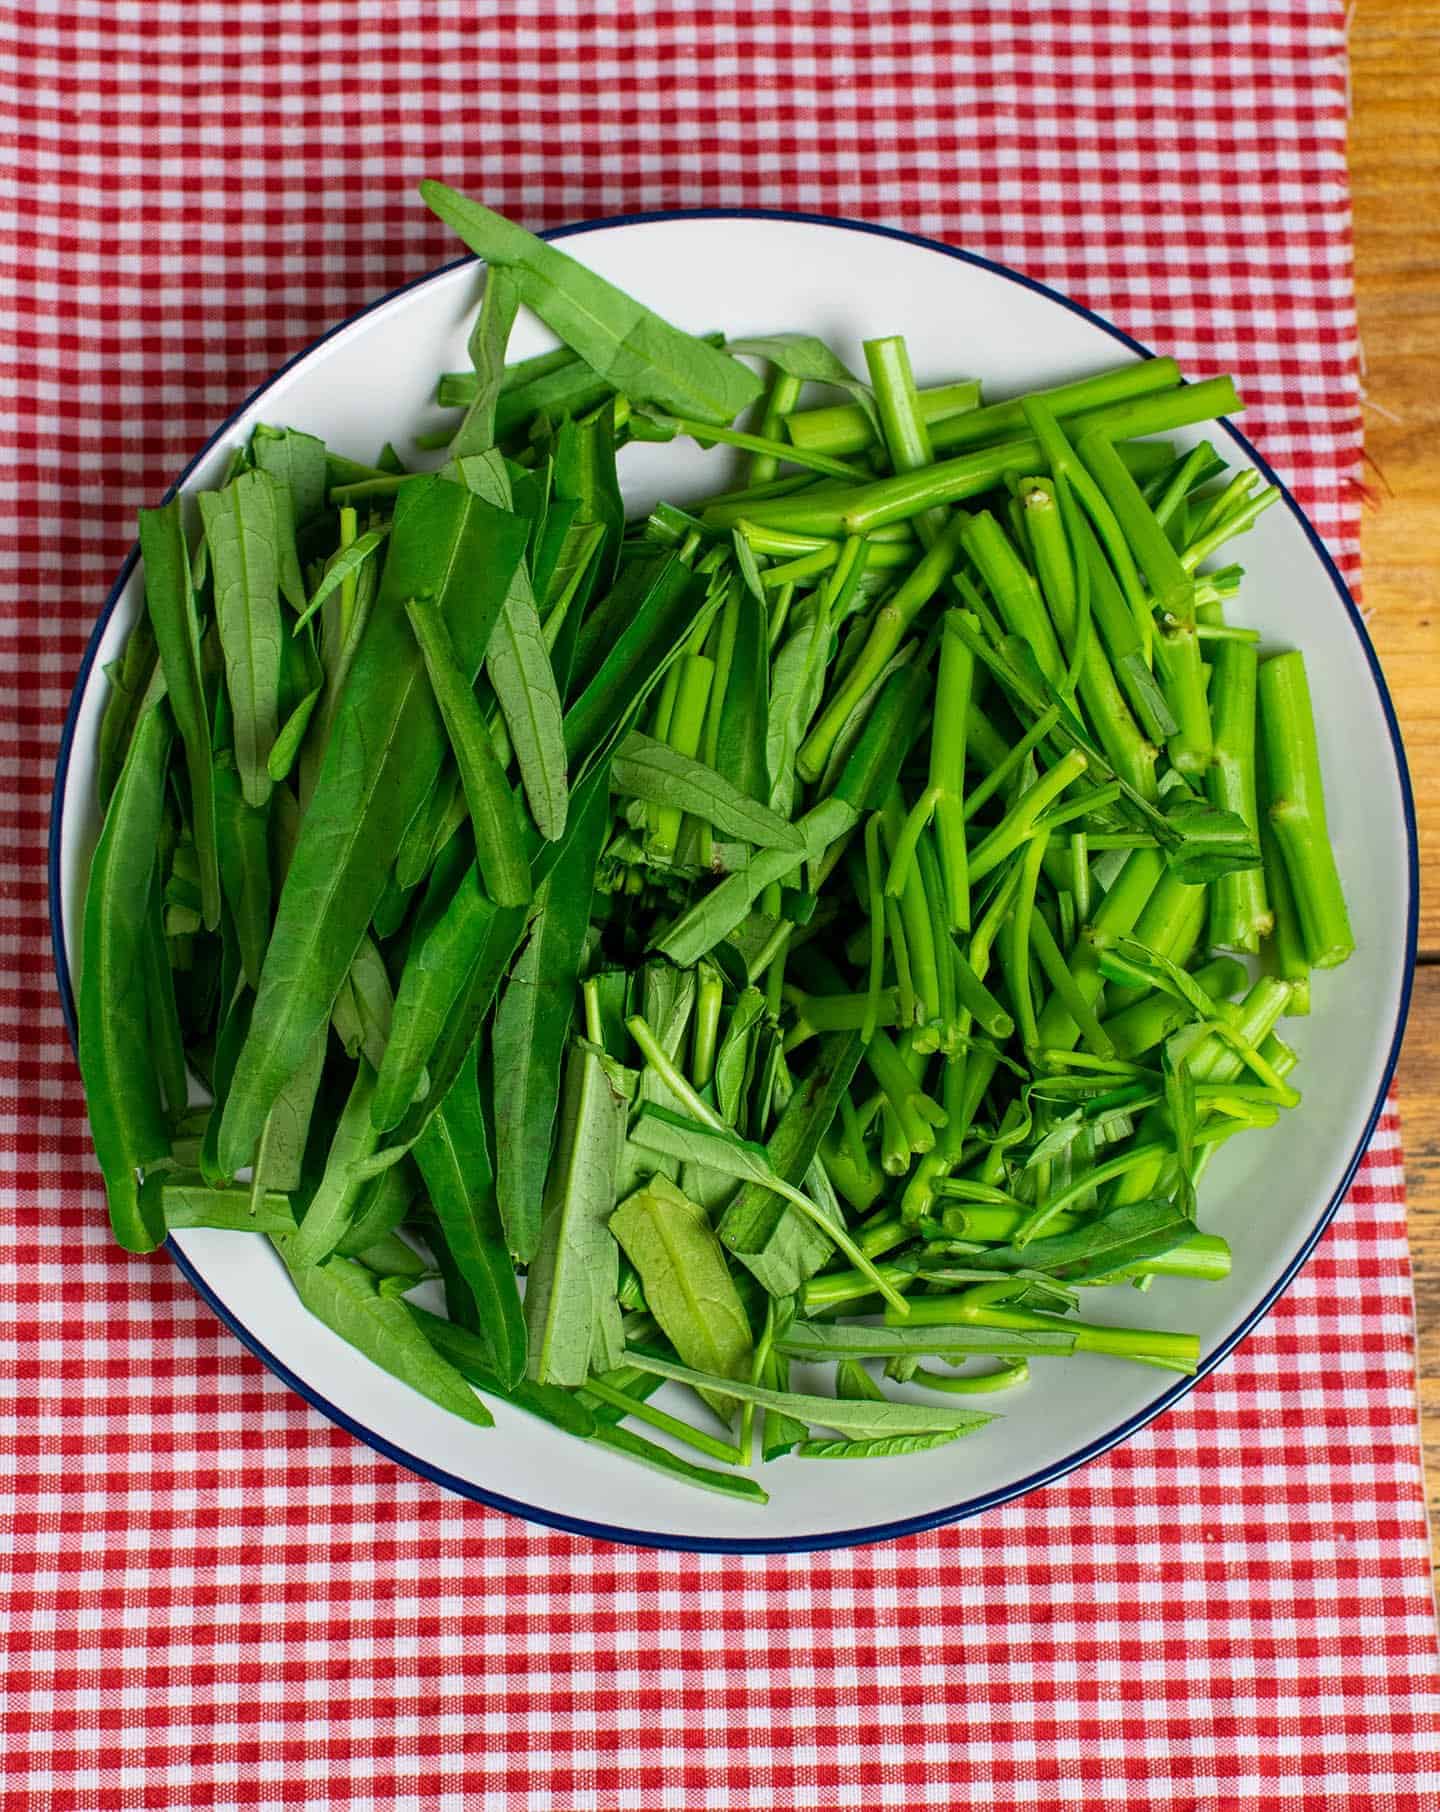 A white plate with a blue rim is filled with chopped morning glory. The pieces are 2-3 inches in length, with more stalks to the right of the plate and more of the leafy part of the vegetable to the left.